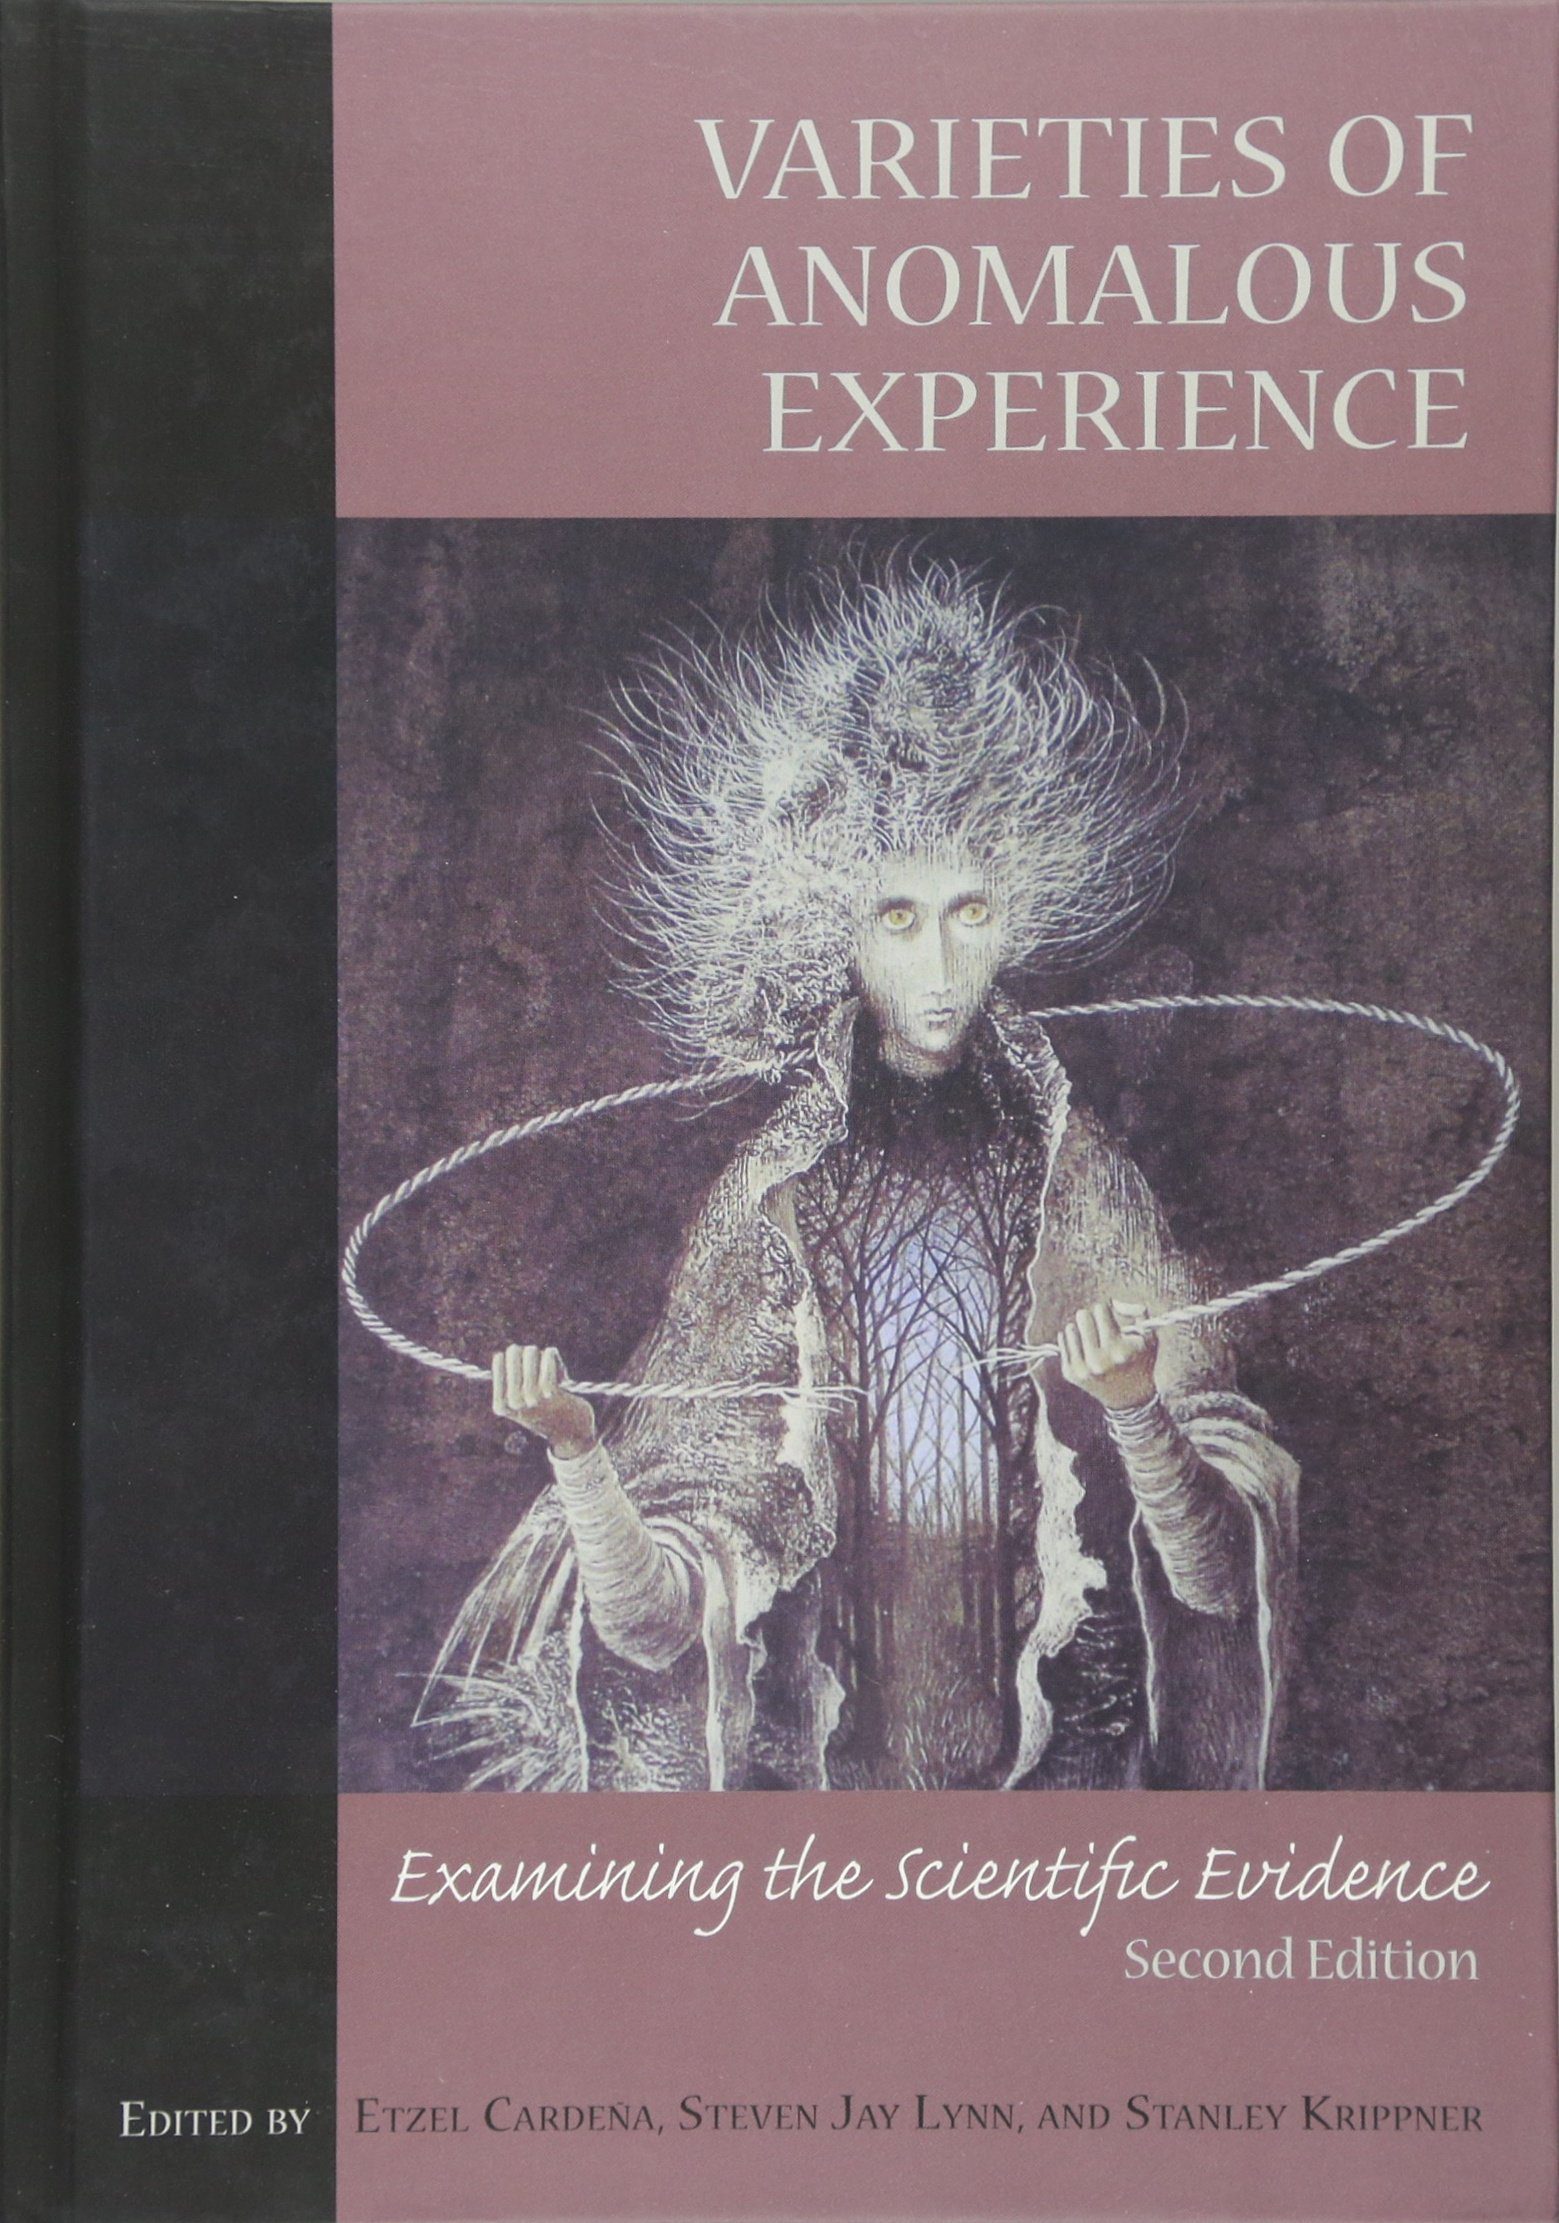 Varieties of Anomalous Experience: Examining the Scientific Evidence (Dissociation, Trauma, Memory, and Hypnosis) Second Edition by Dr. Steven Jay Lynn PhD (Editor), Dr. Stanley C. Krippner PhD (Editor)